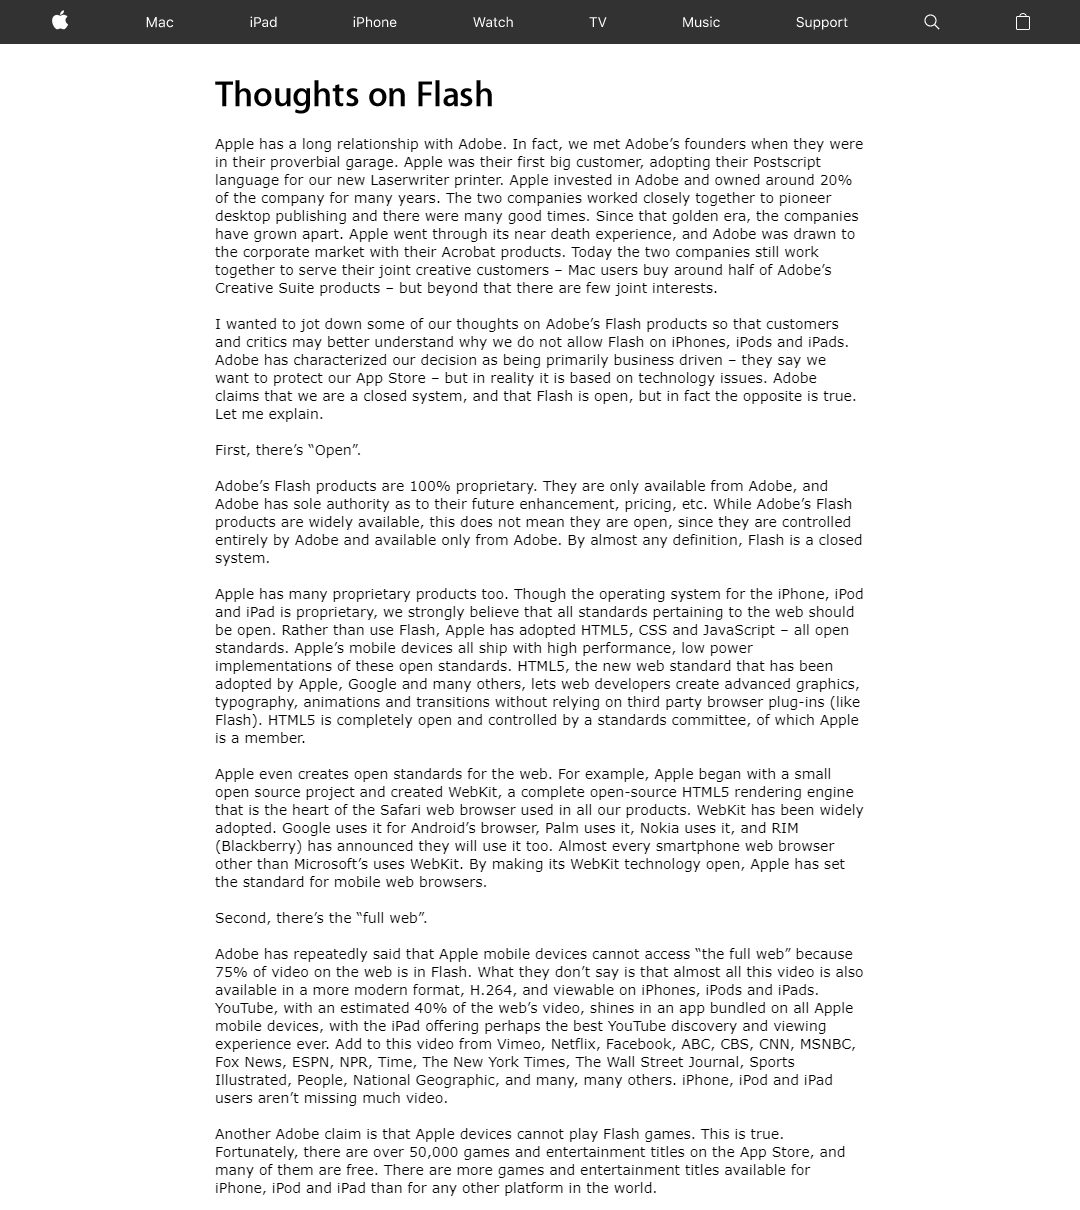 Steve Jobs and his Thoughts on Flash in 2010